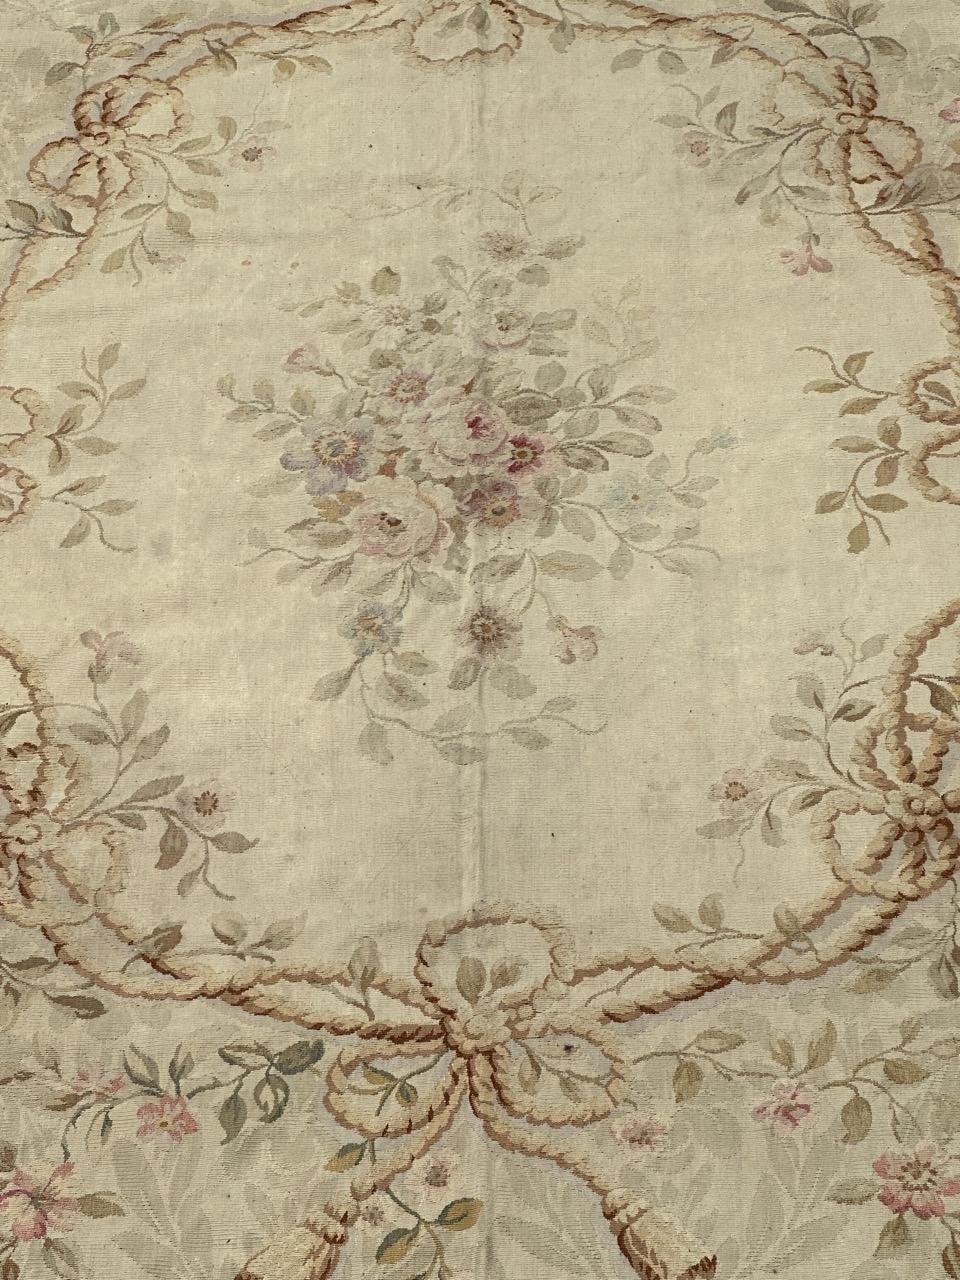 Hand-Woven Wonderful large antique French Aubusson rug For Sale